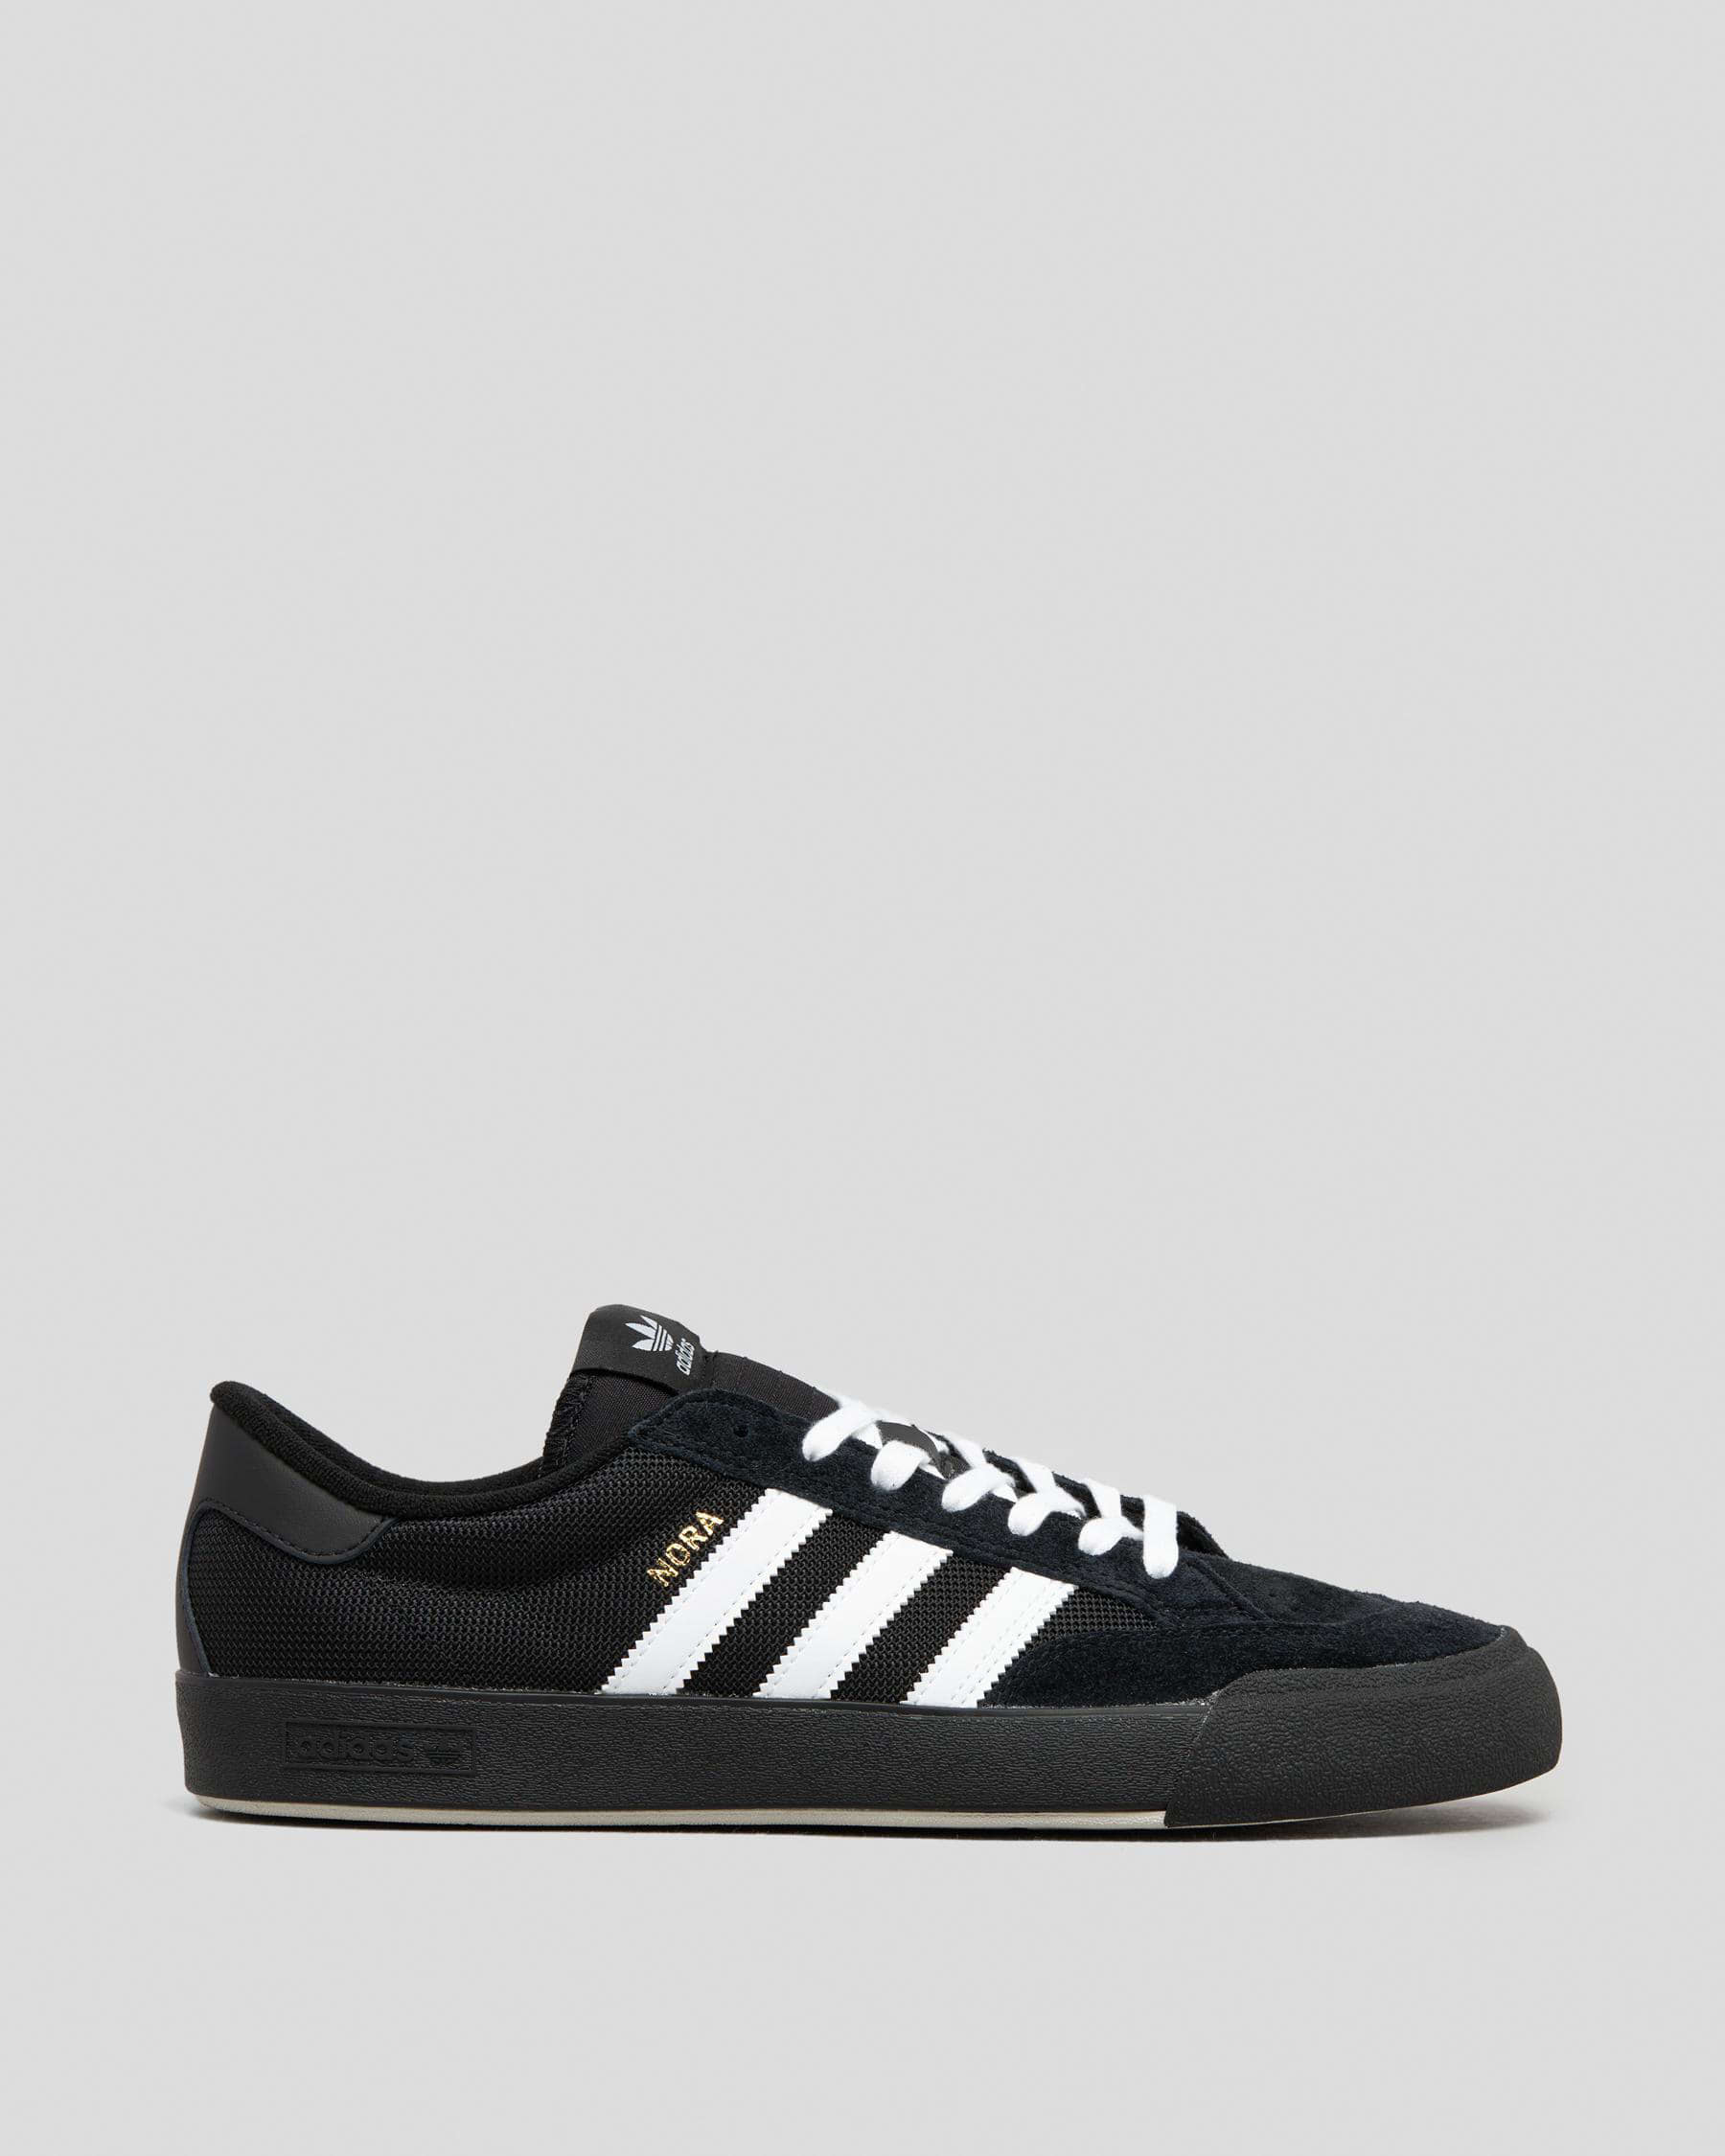 Adidas Nora Shoes In Cblack/ftwwhit/goldmt - Fast Shipping & Easy ...